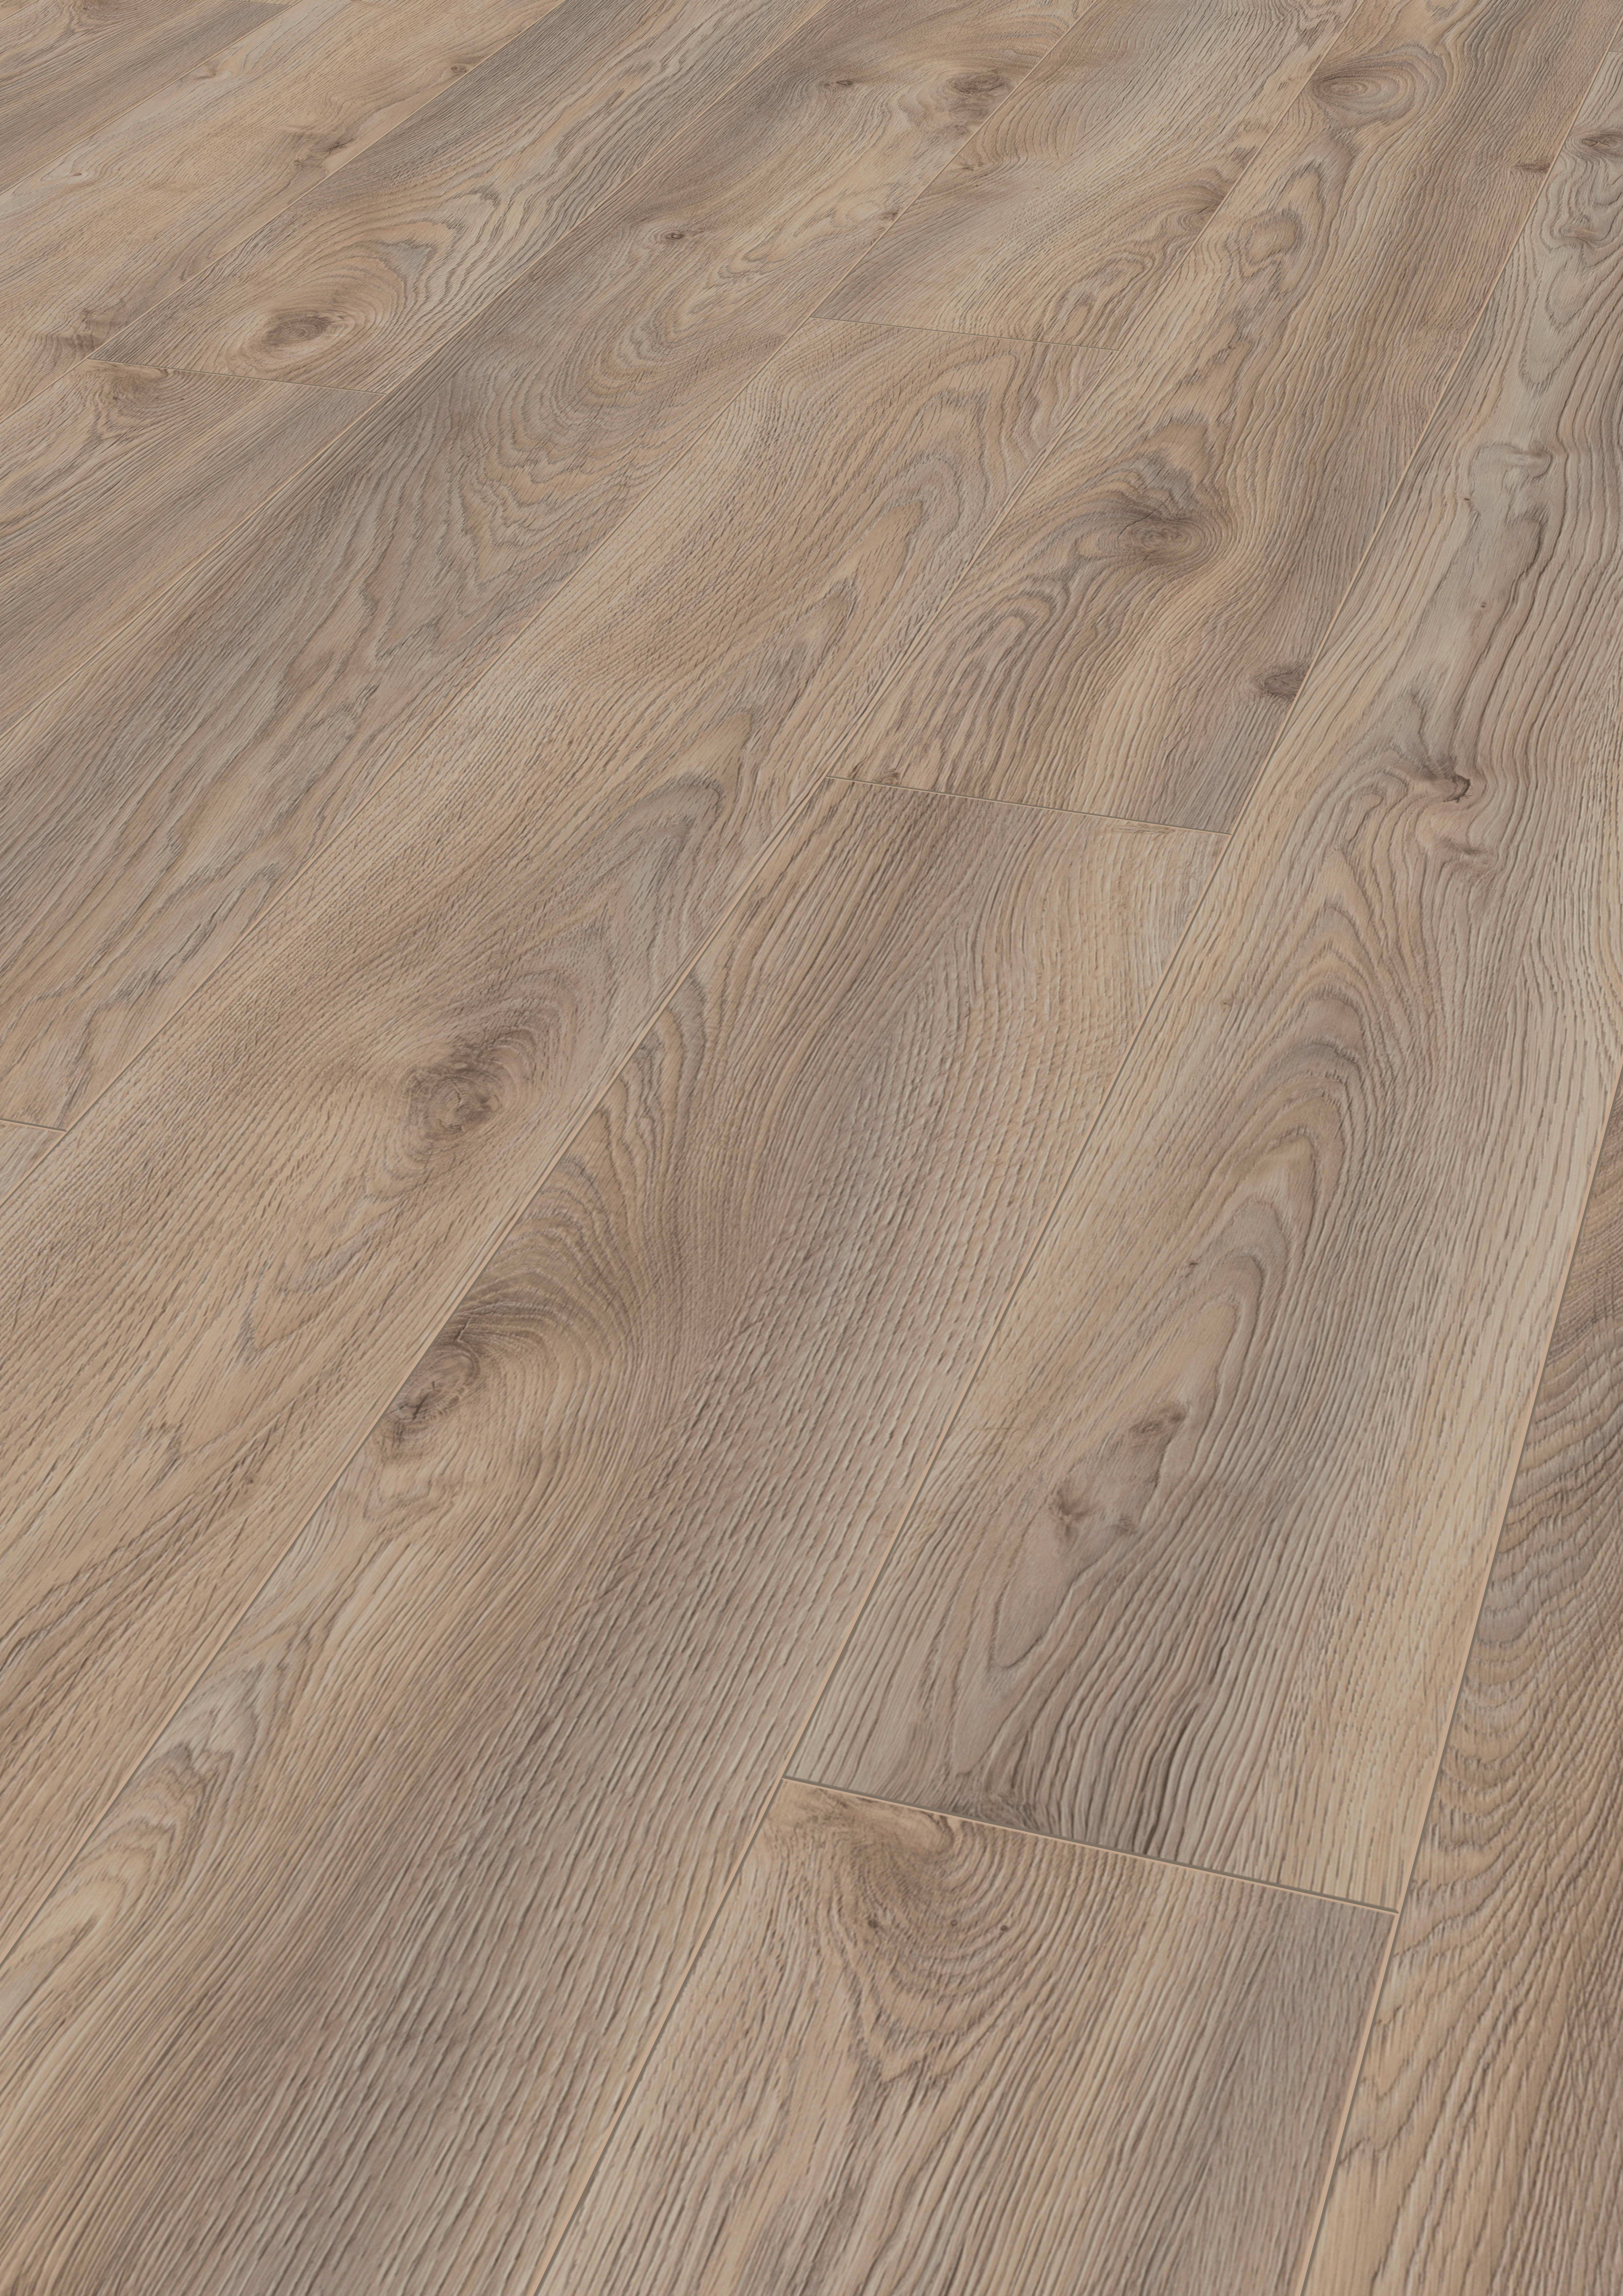 13 Stylish Hardwood Floors Magazine Digital issue 2024 free download hardwood floors magazine digital issue of mammut laminate flooring in country house plank style kronotex within download picture amp 1